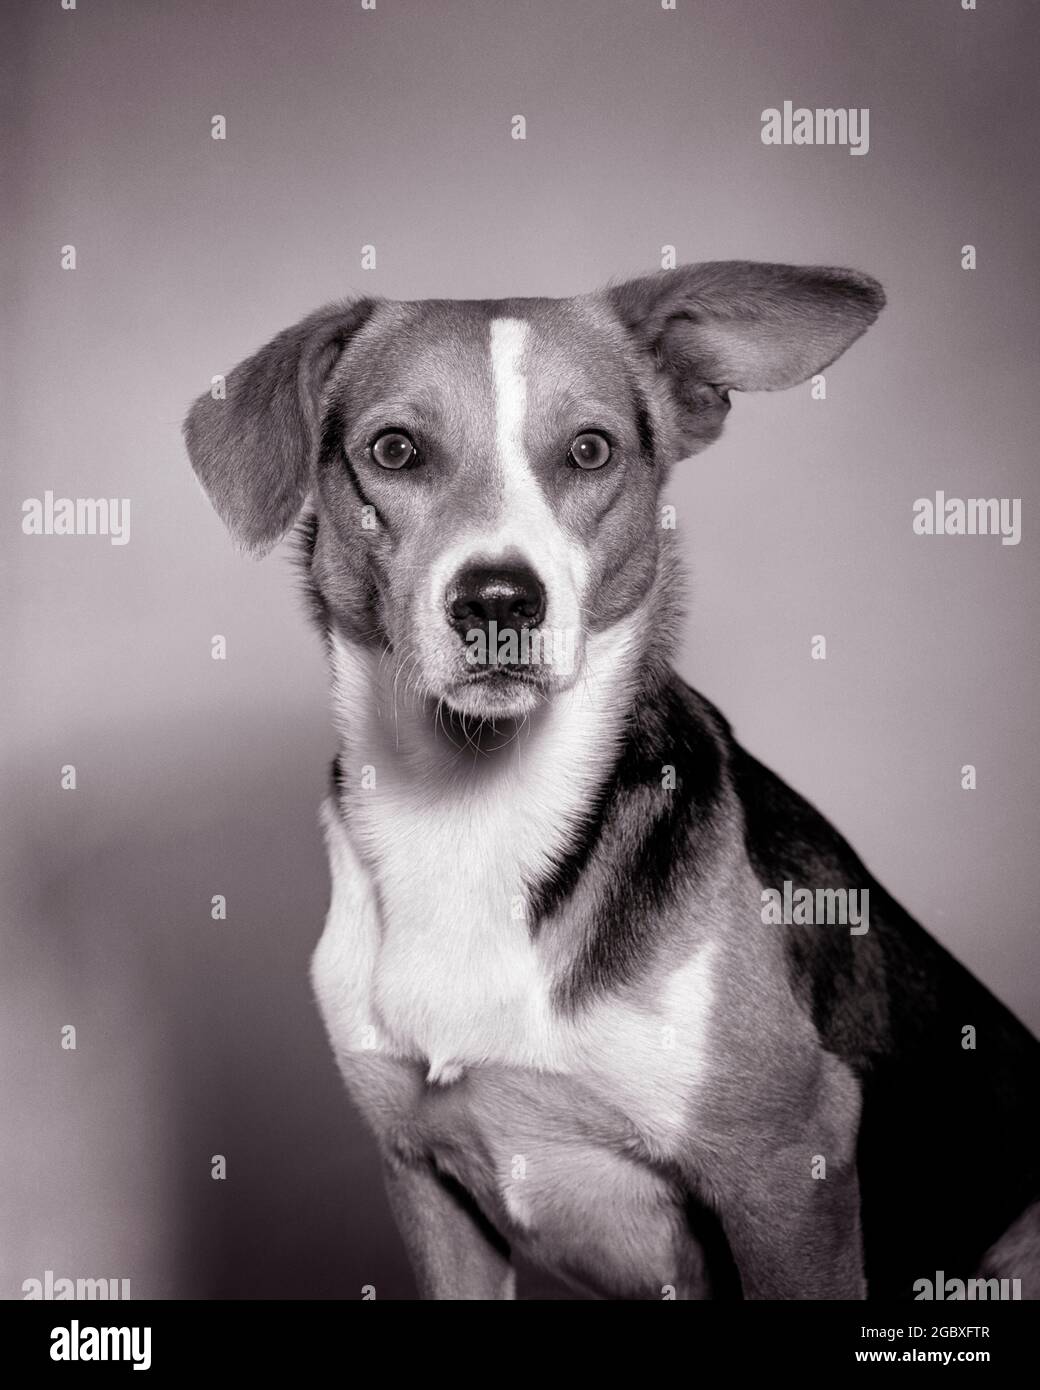 1950s PORTRAIT OF DOG LOOKING AT CAMERA ONE EAR POINTING STRAIGHT OUT THEY WENT THAT WAY DIRECTION - dc299 24 CAM001 HARS CONCEPTUAL COMEDY WACKY IDIOSYNCRATIC AMUSING CANINE ECCENTRIC MAMMAL BLACK AND WHITE DIRECT OLD FASHIONED Stock Photo